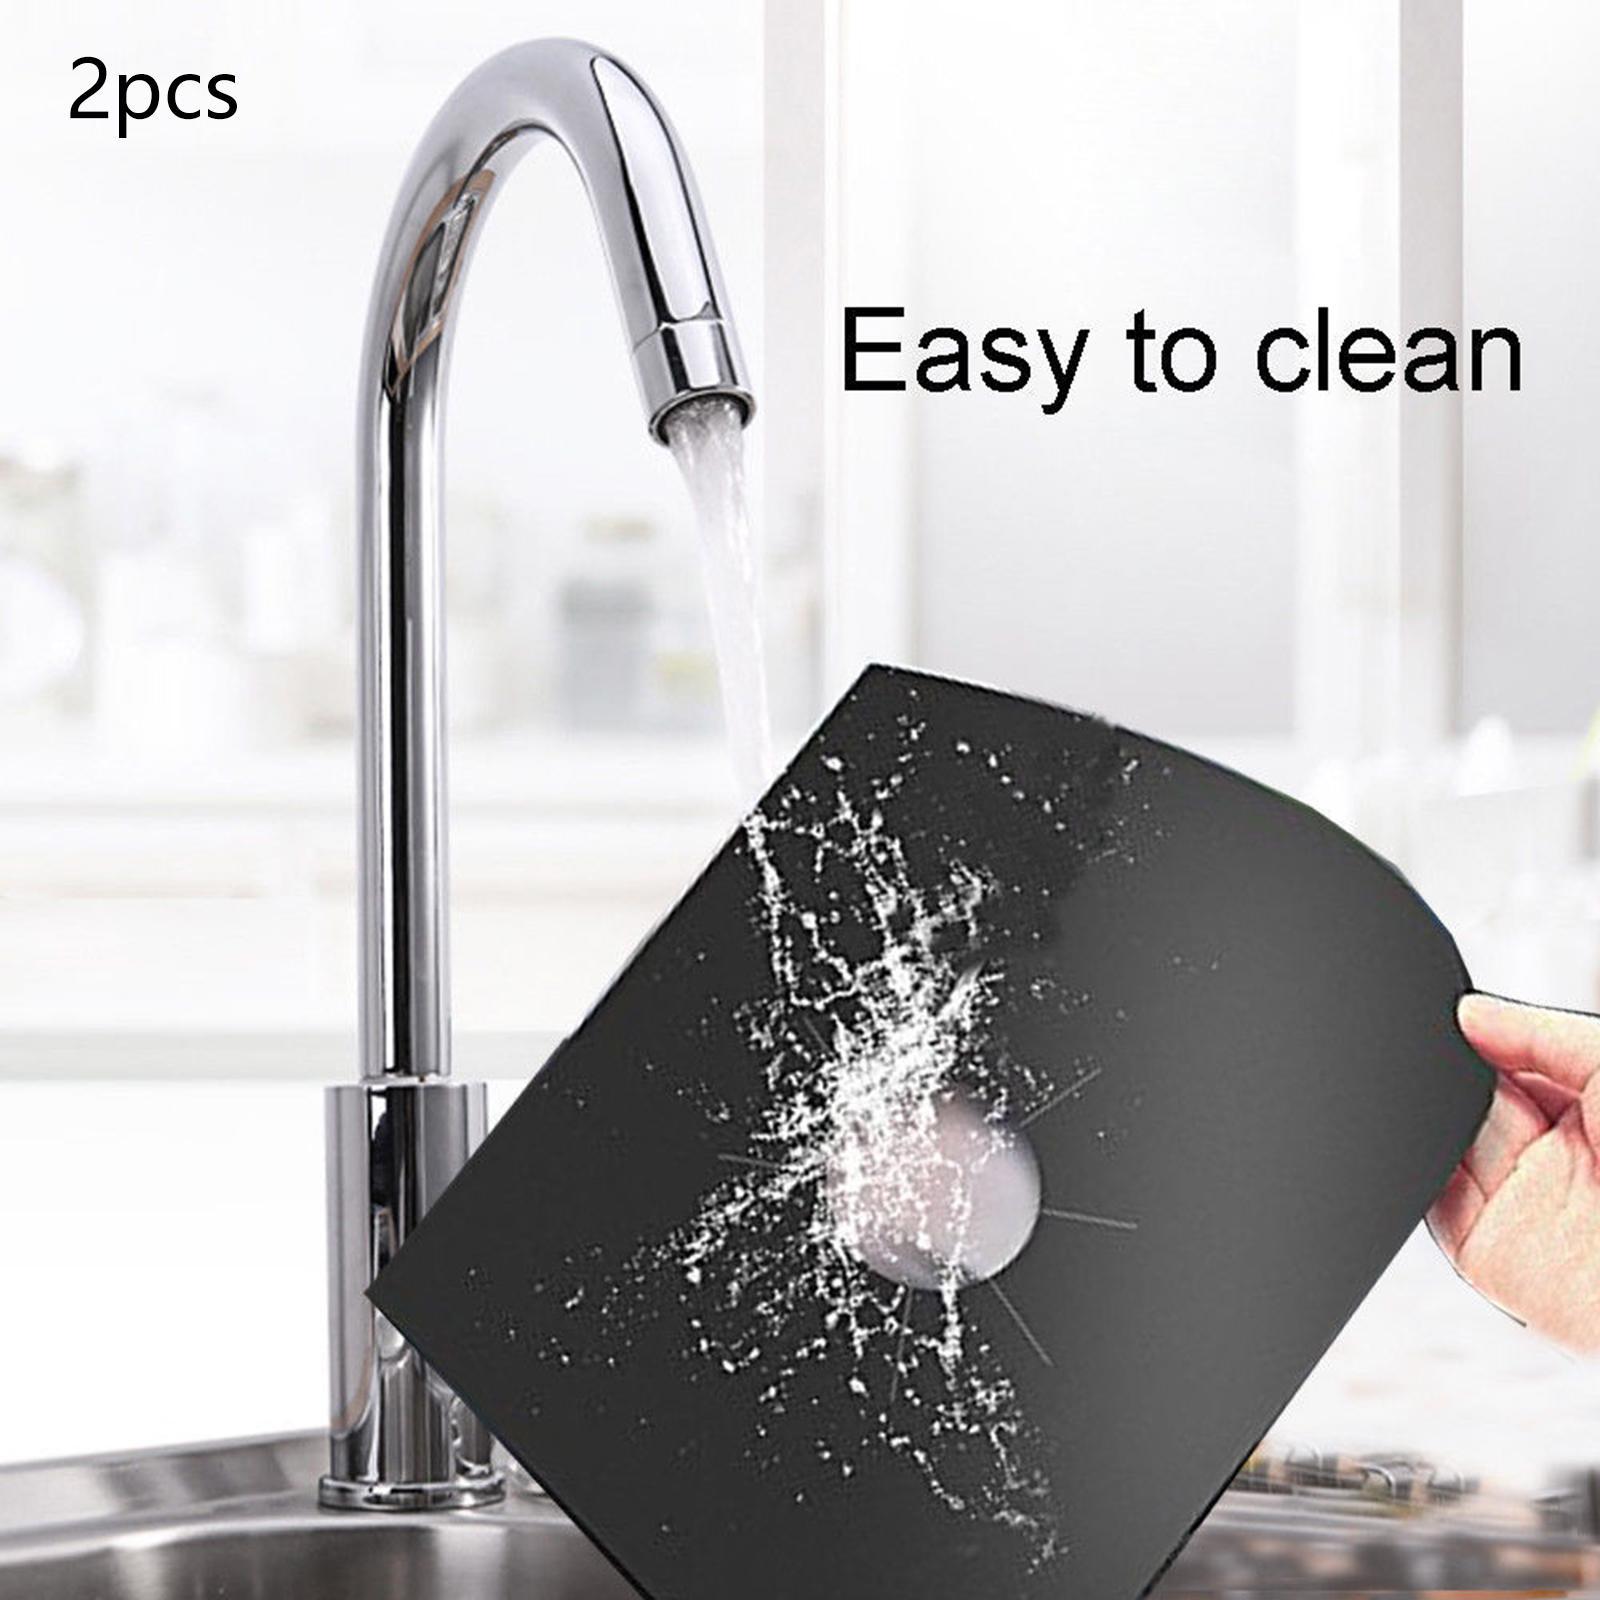 2Pcs  Burner Covers Easy to Clean    for Kitchen